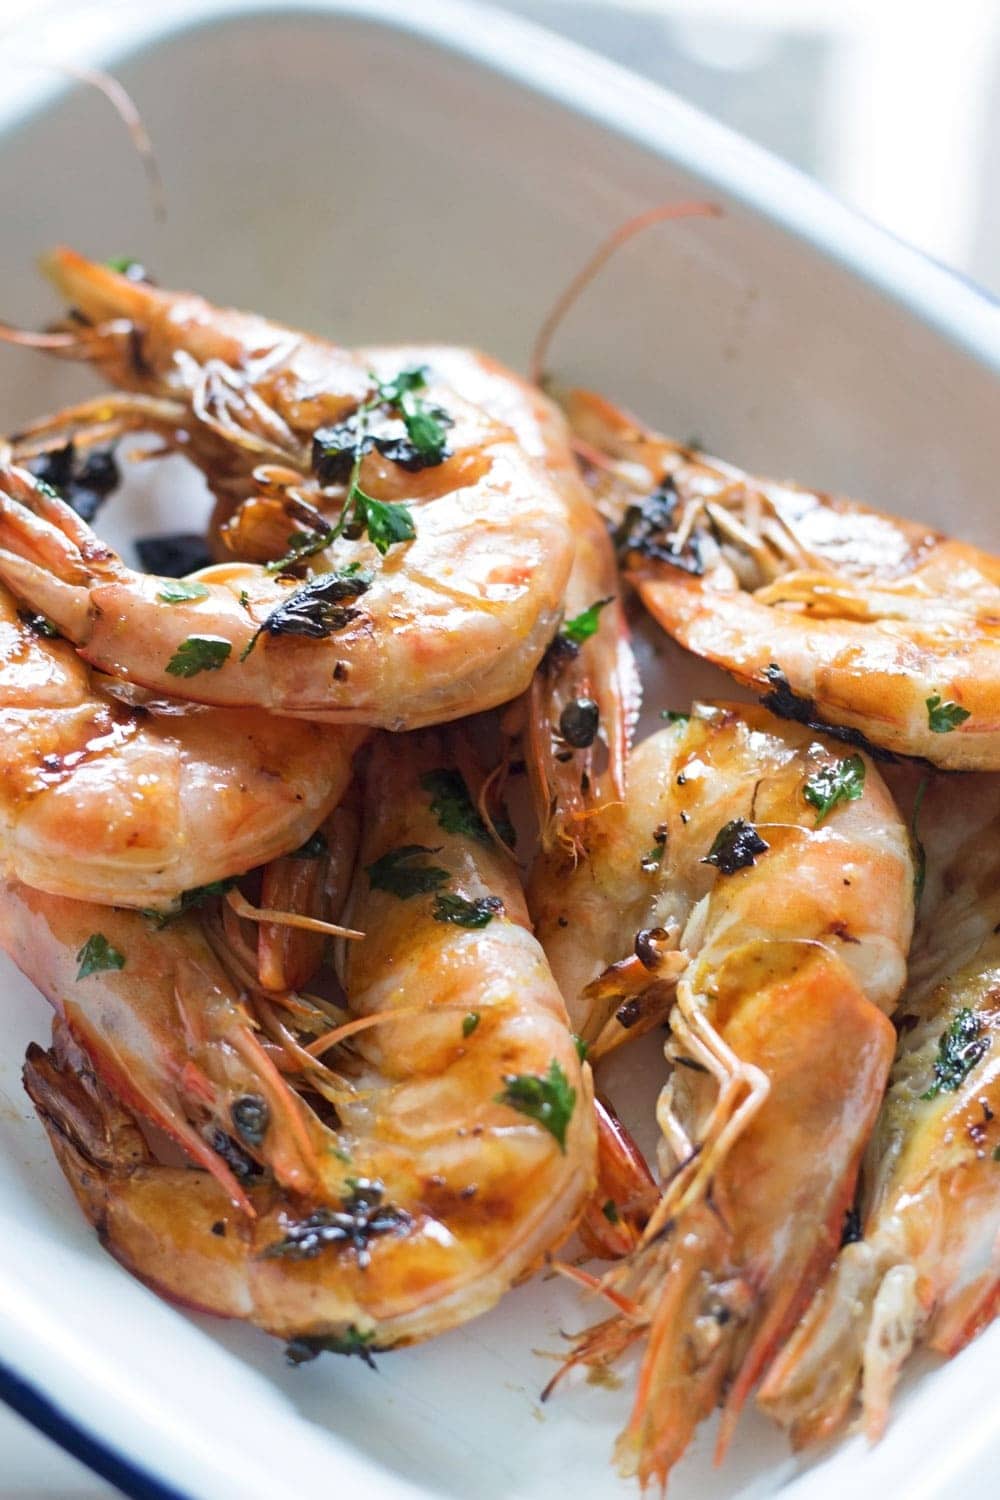 This chilli & garlic prawns recipe is the perfect thing to serve at a summer dinner party! It's quick, simple and is guaranteed to impress.